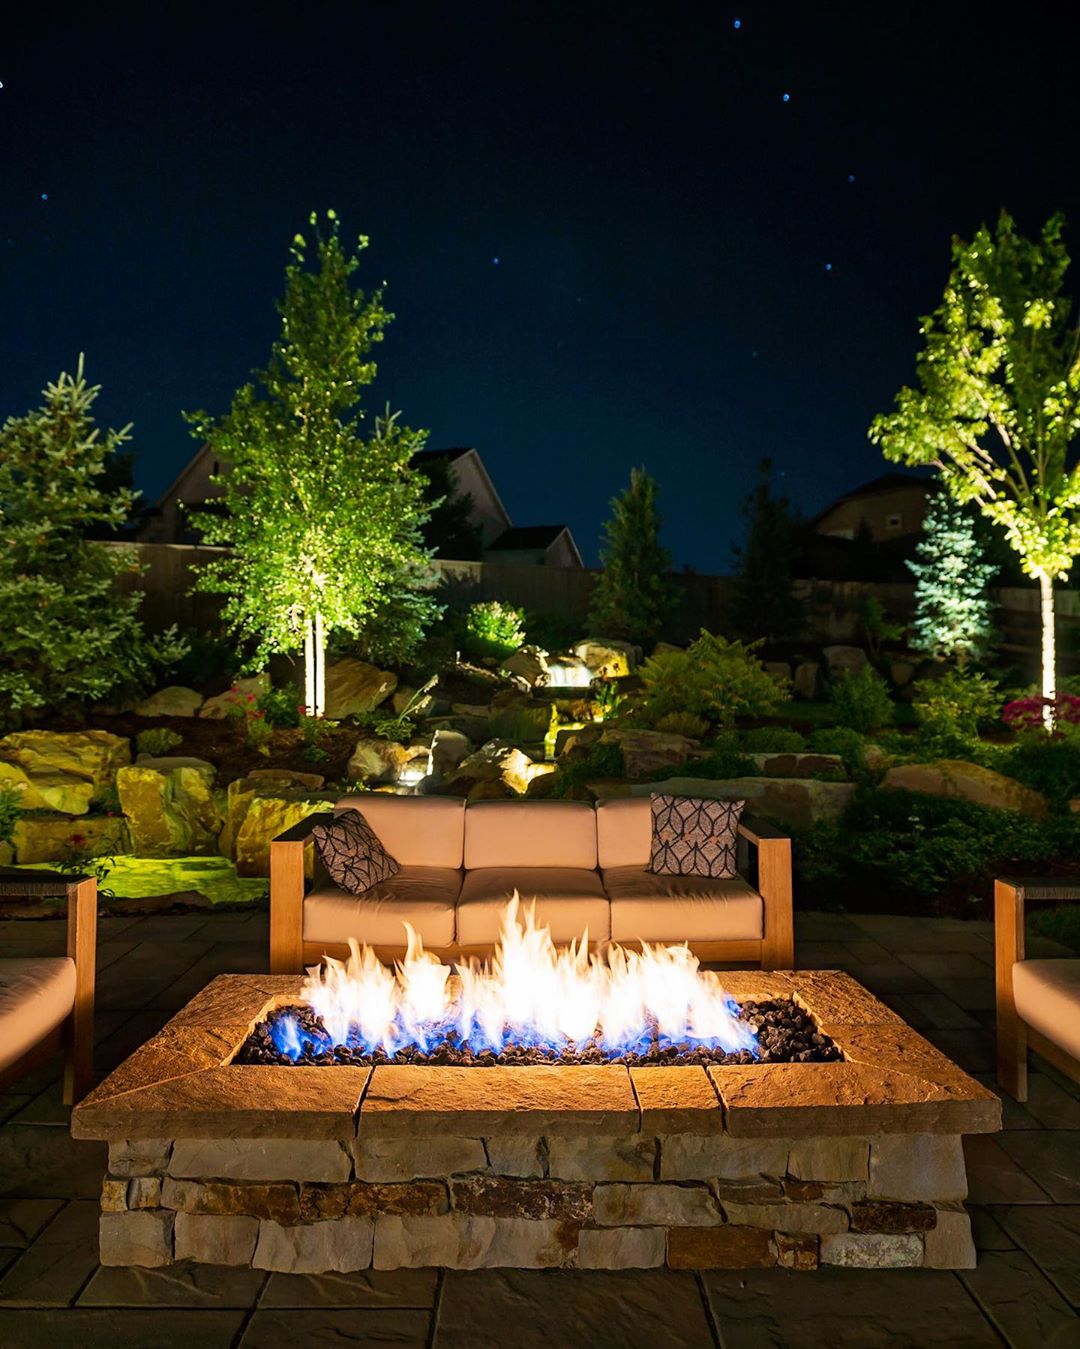 Backyard Fire Pit with Nice Furniture Around and Landscape Lighting. Photo by Instagram user @hineroutdoorliving